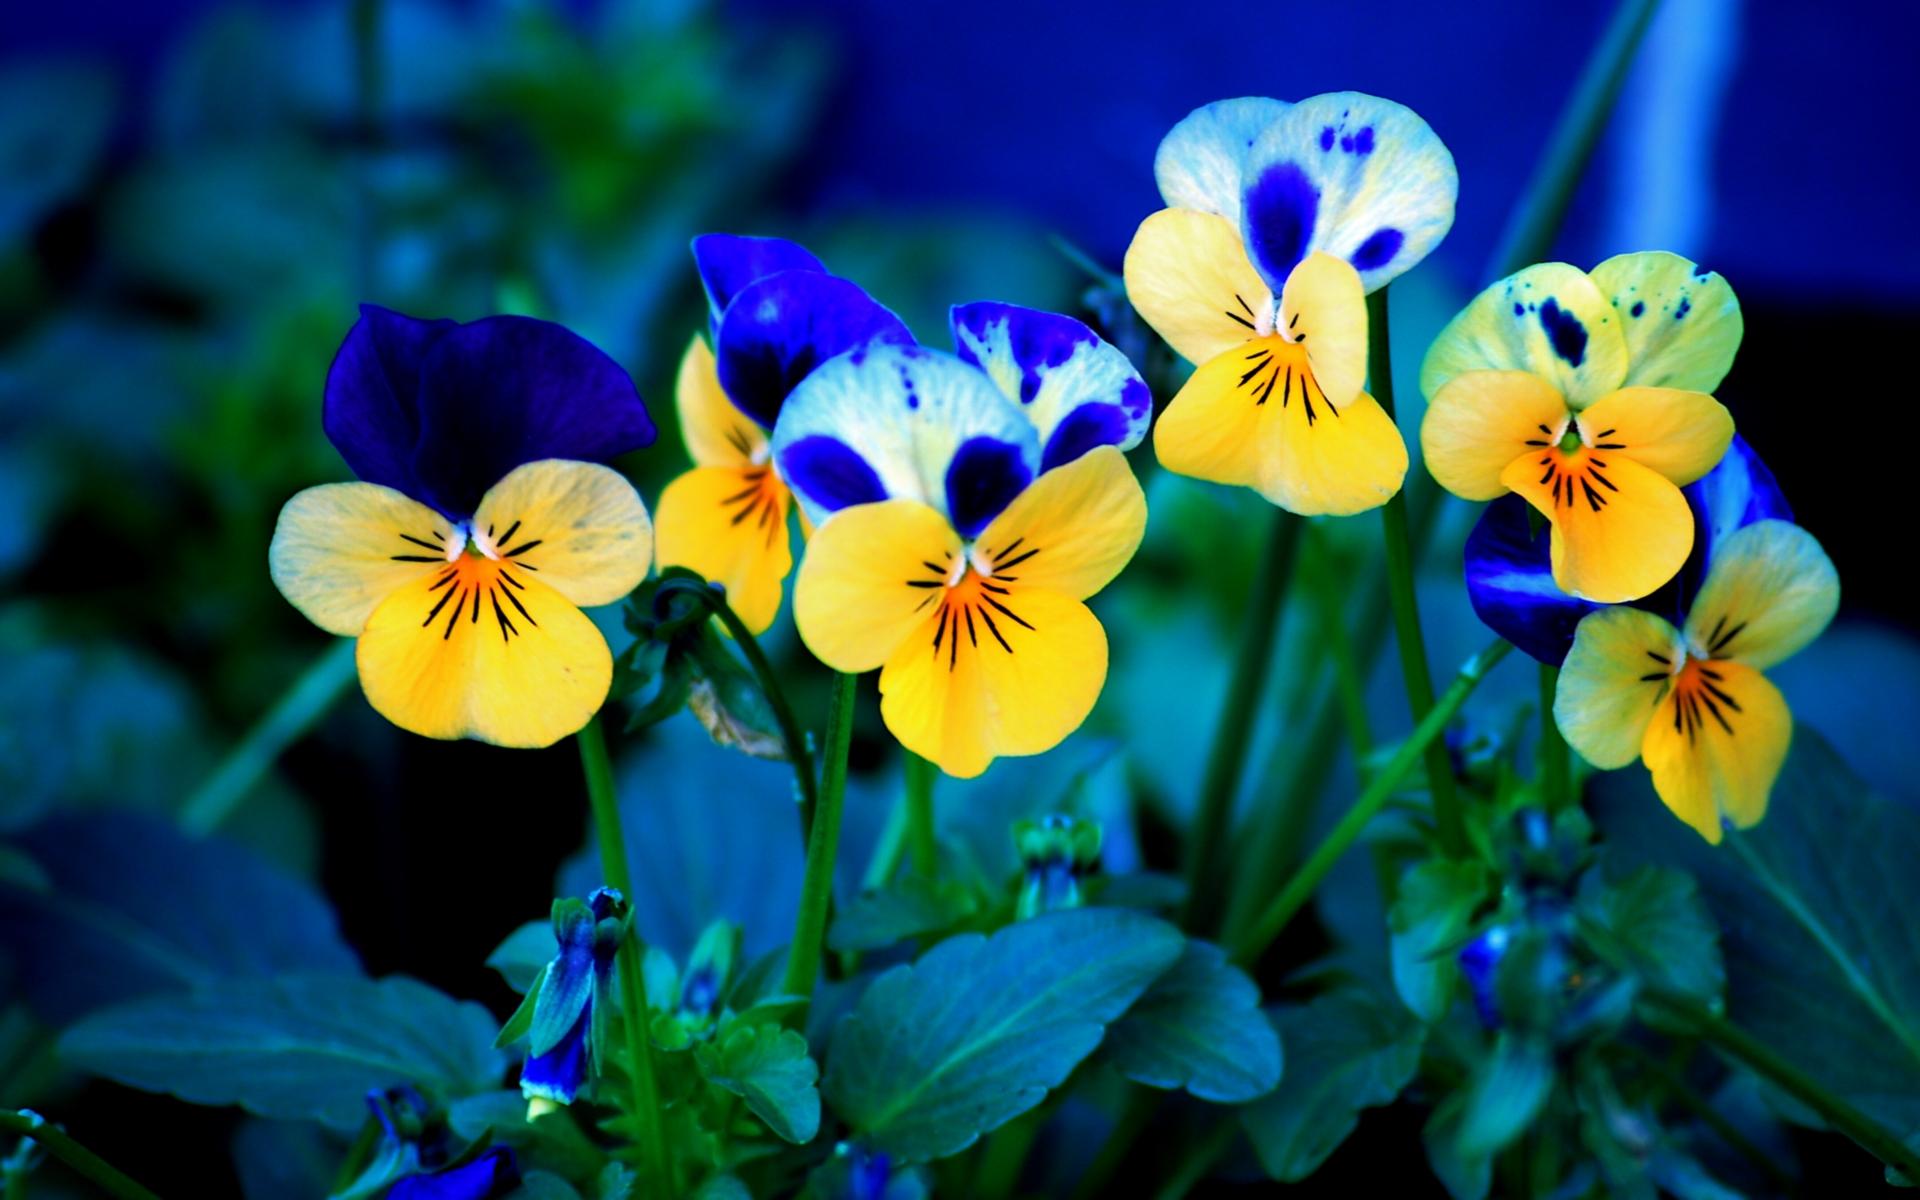 Pansies Dell wallpapershigh resolution High Definition Wallpapers